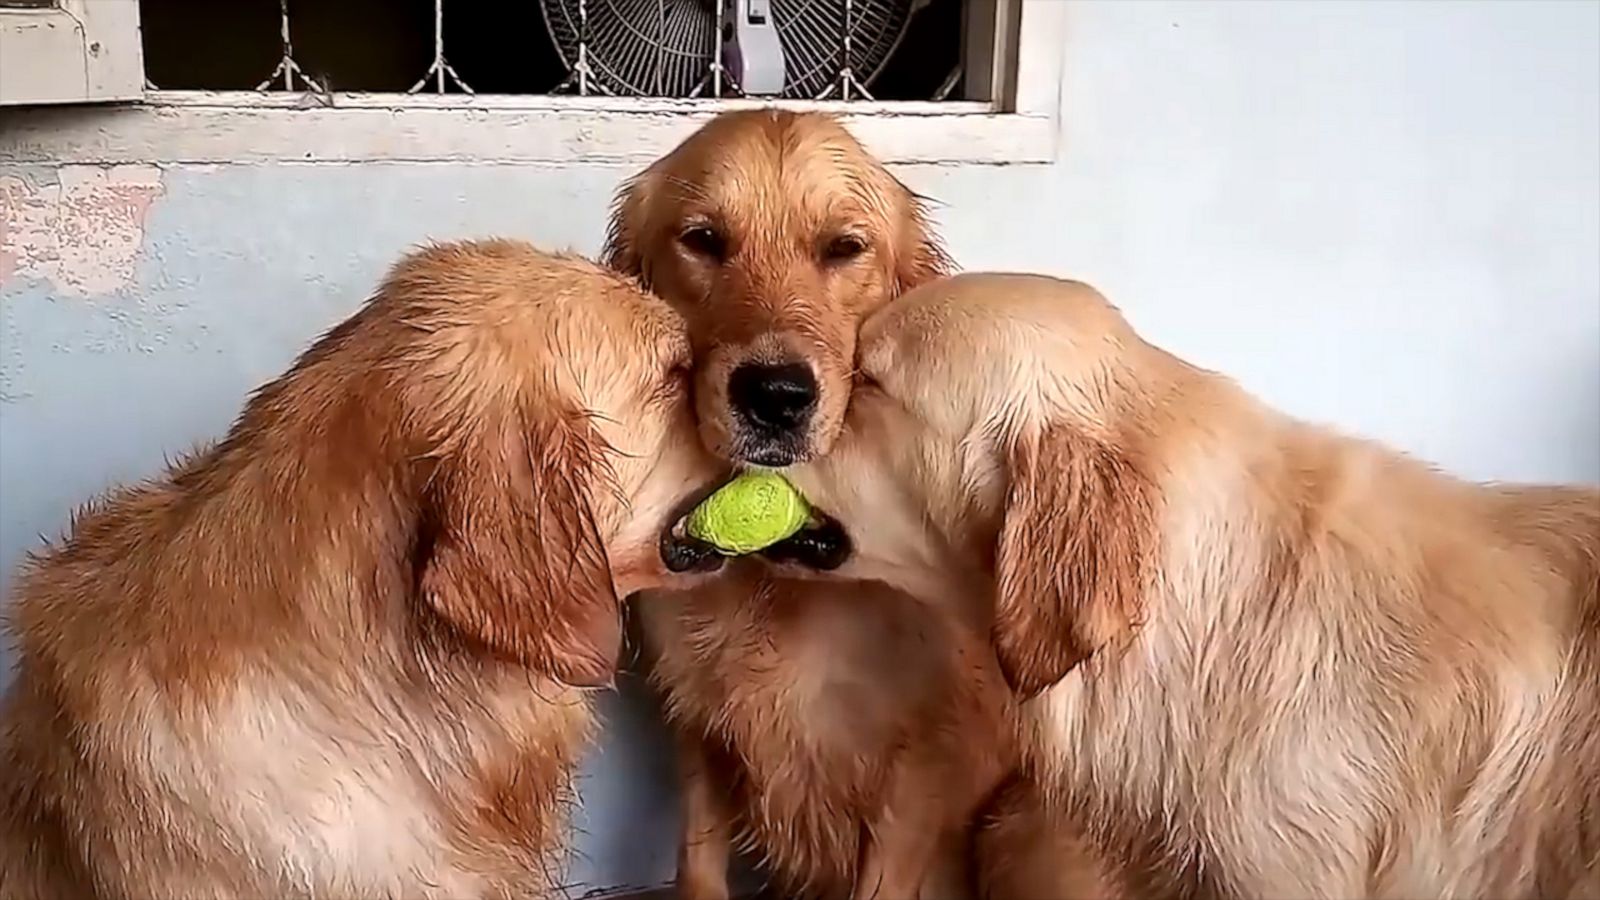 VIDEO: Two Golden Retrievers fight over a tennis ball and a third just wants them to get along